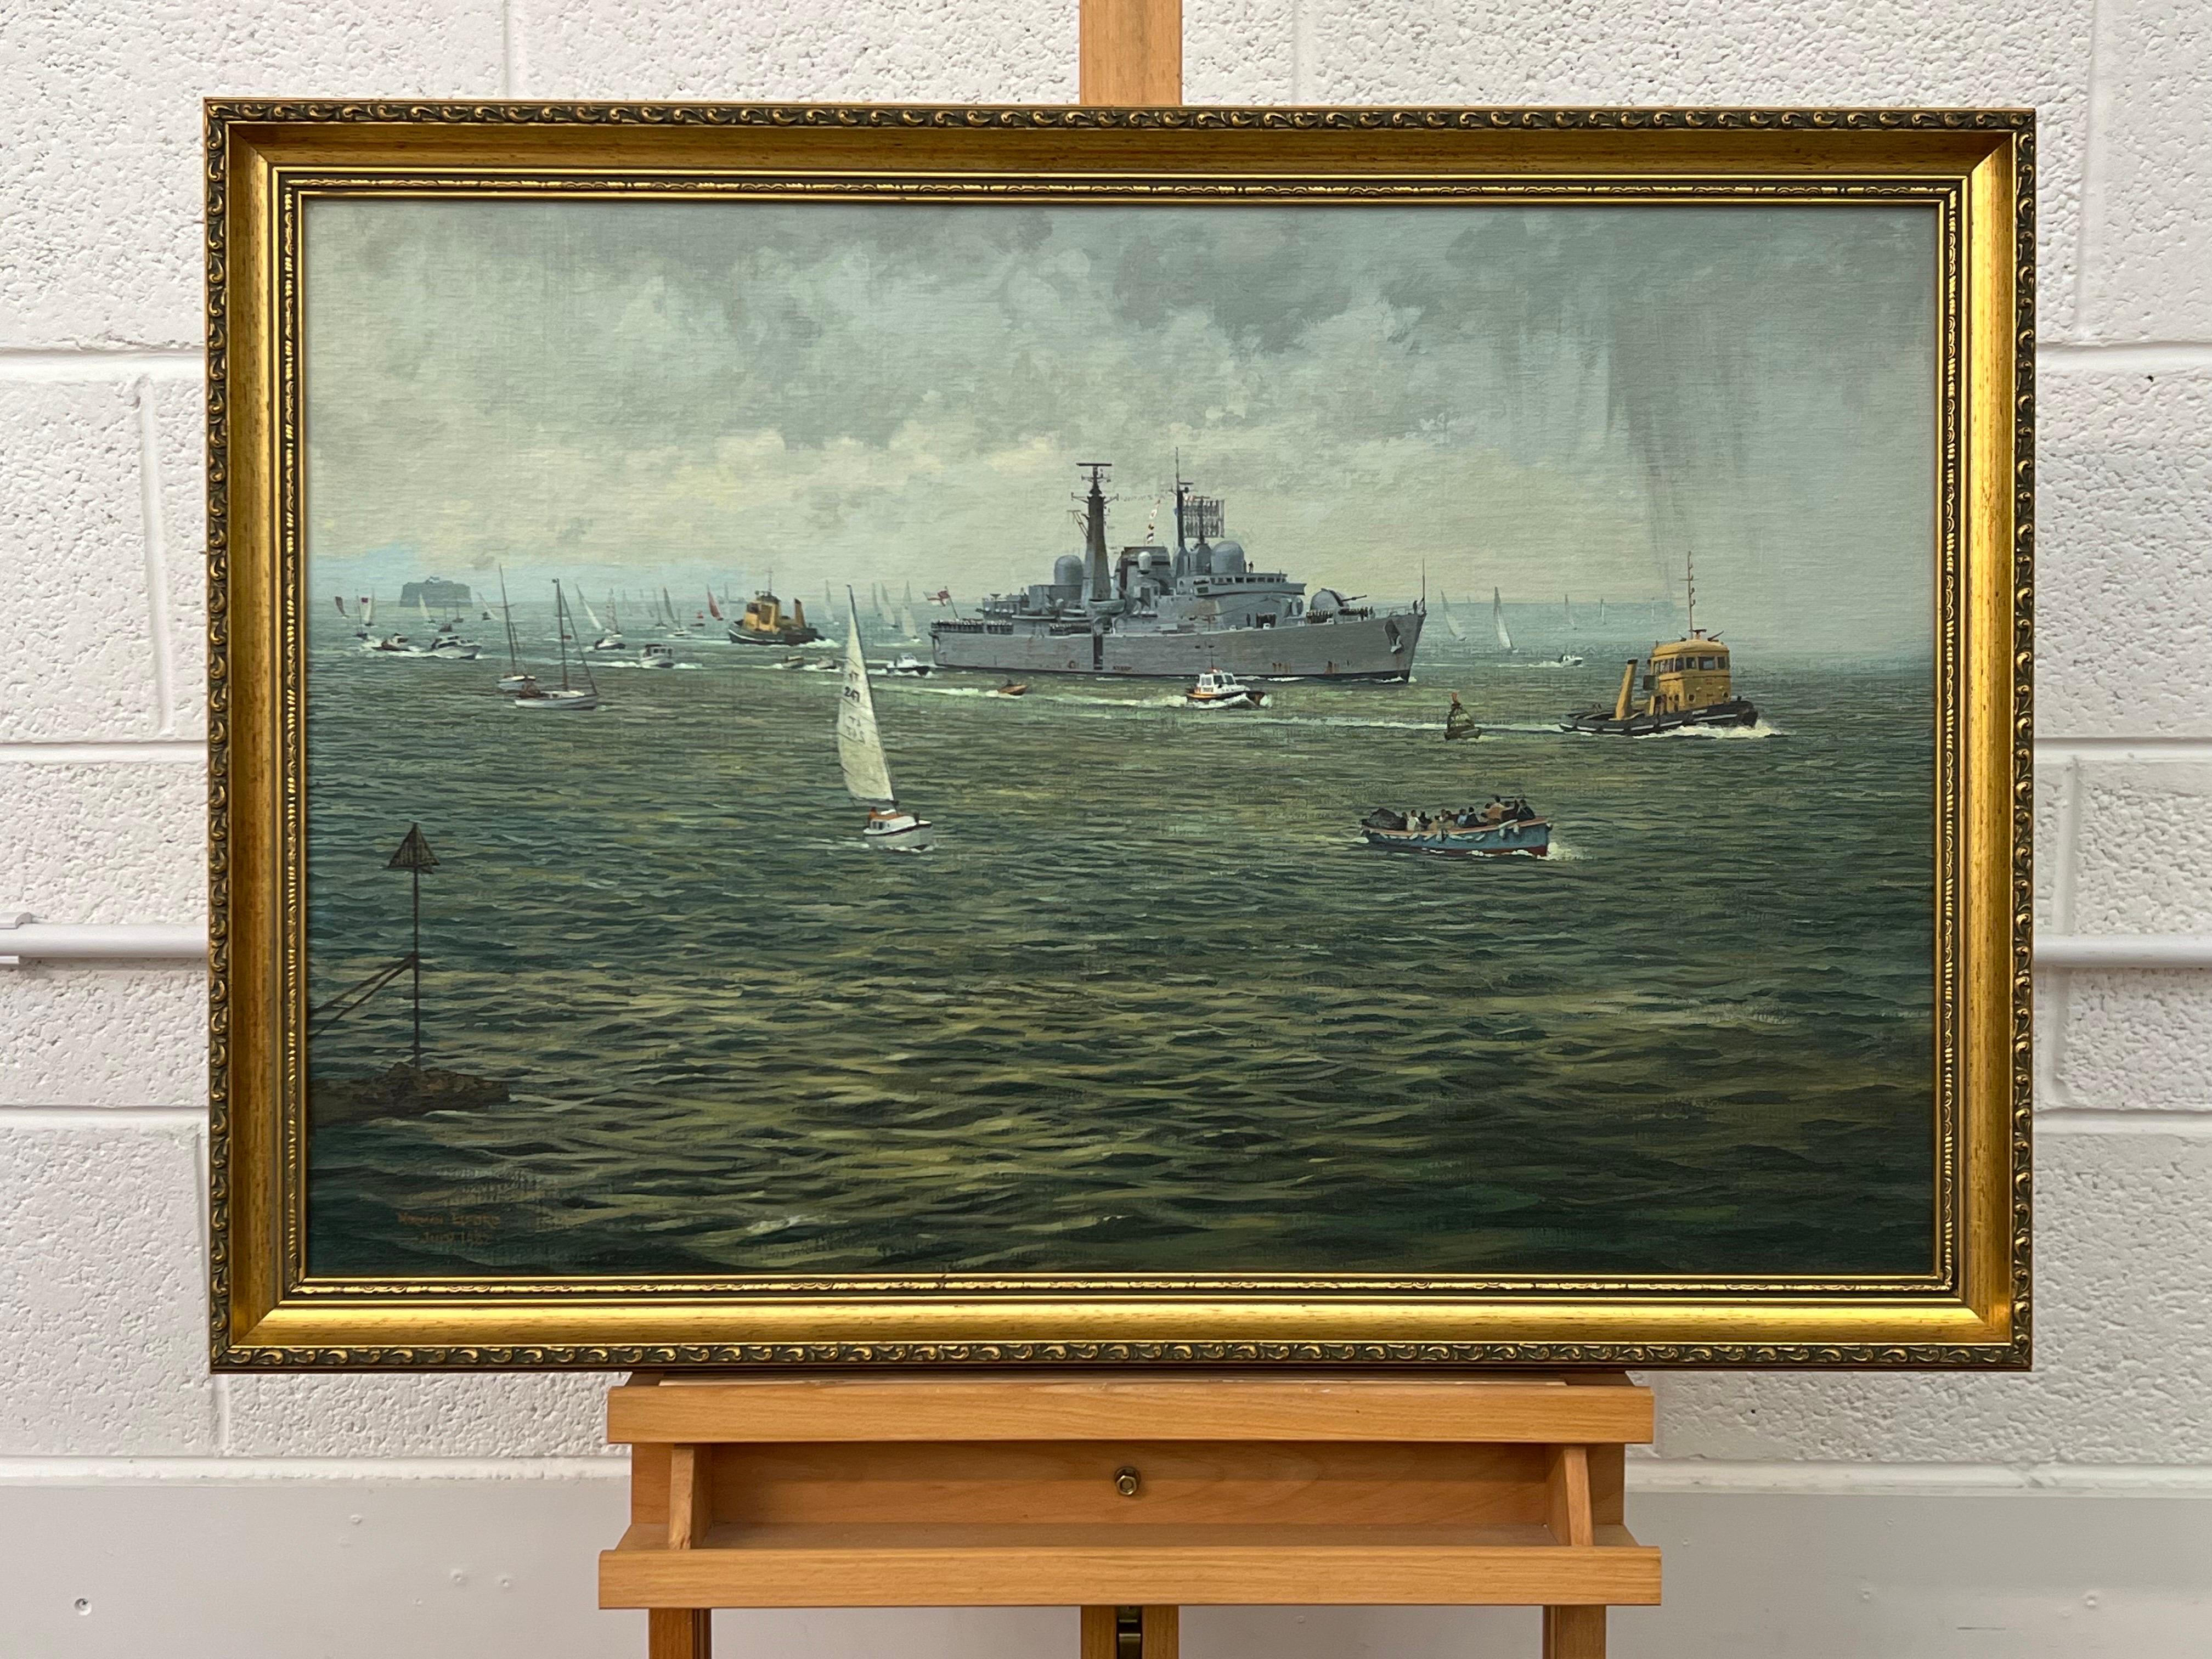 HMS Glasgow returning from Falklands - Shipping Scene Warship & other Vessels - Realist Painting by Norman Elford